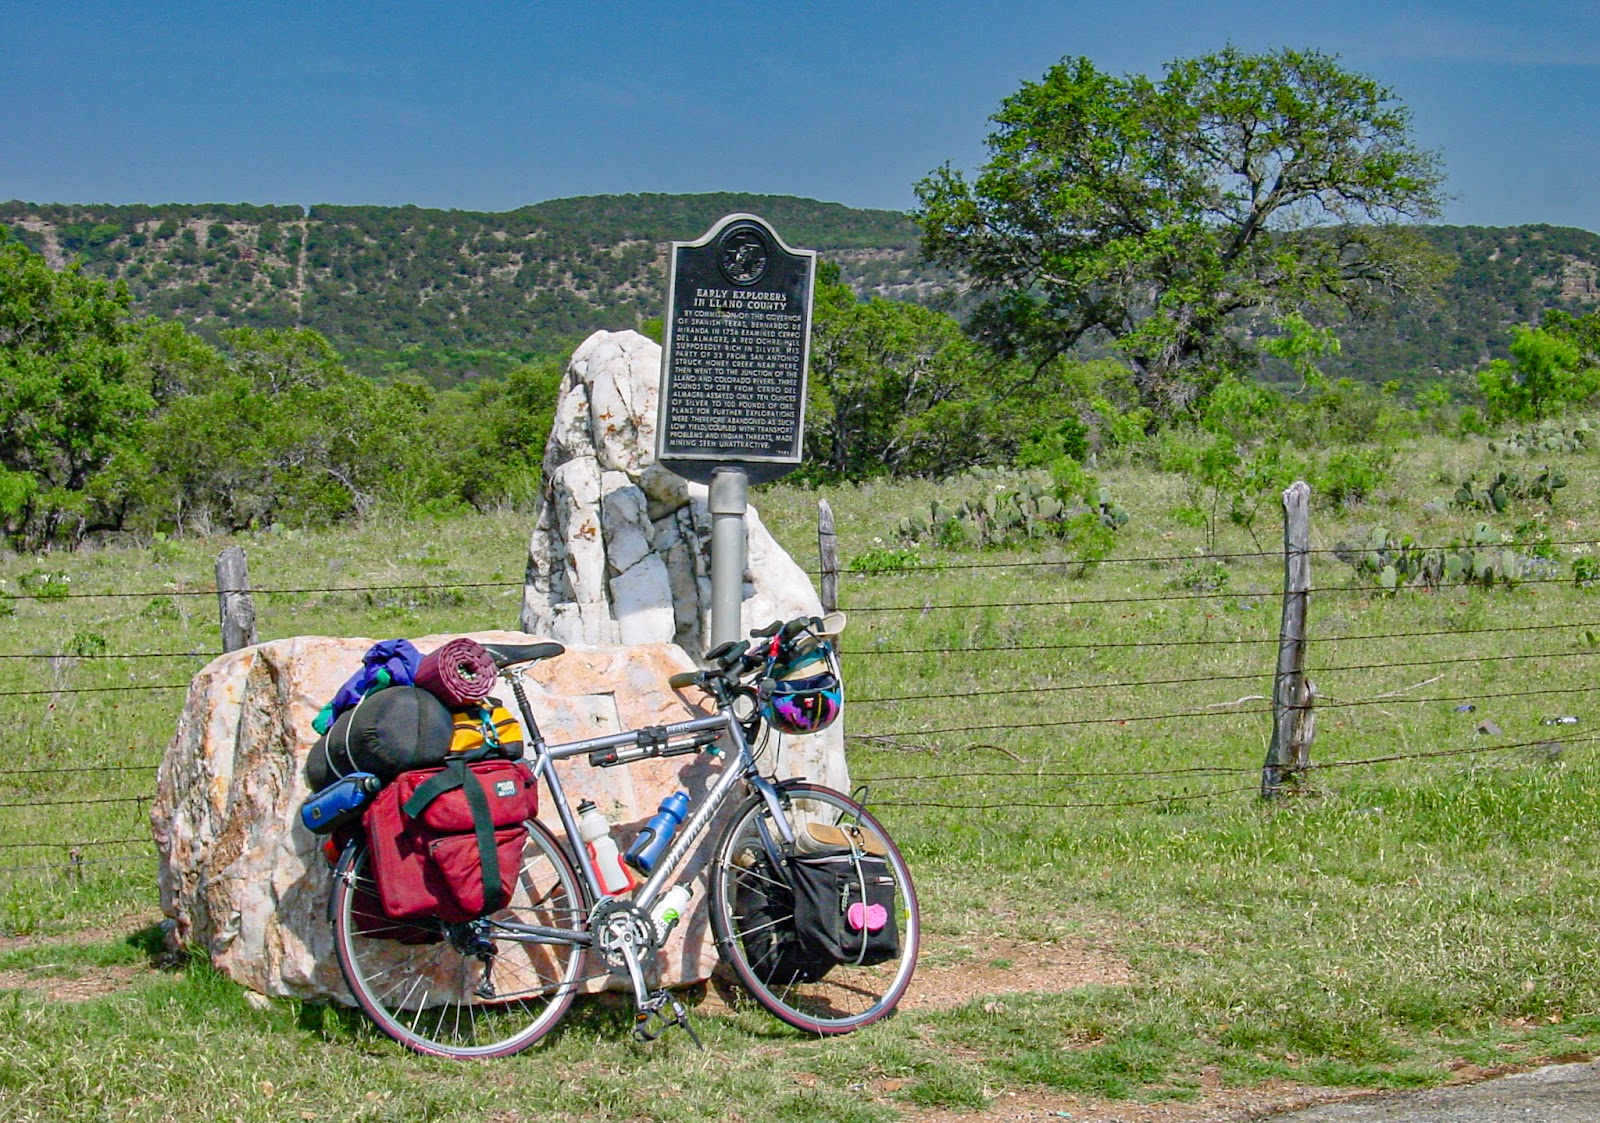 Bike leaning on rocks that surround an Interpretive sign on the side of a road. Hills in the background. 